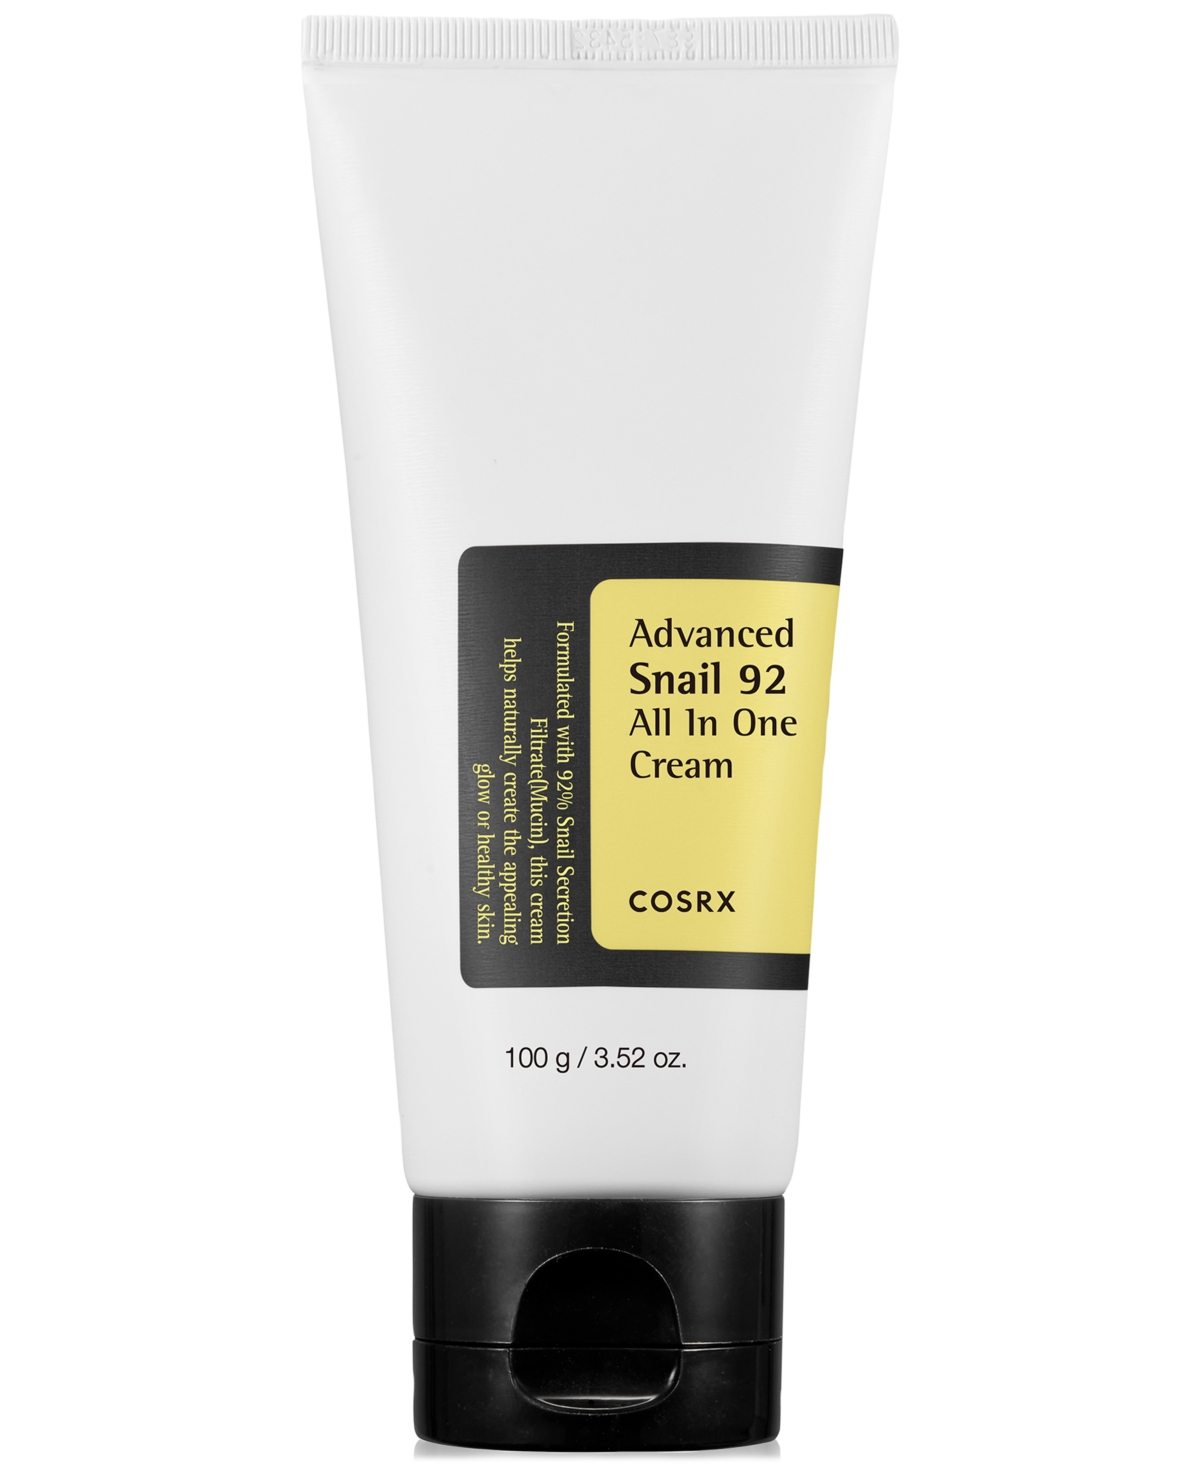 Advanced Snail 92 All In One Cream, 100 g